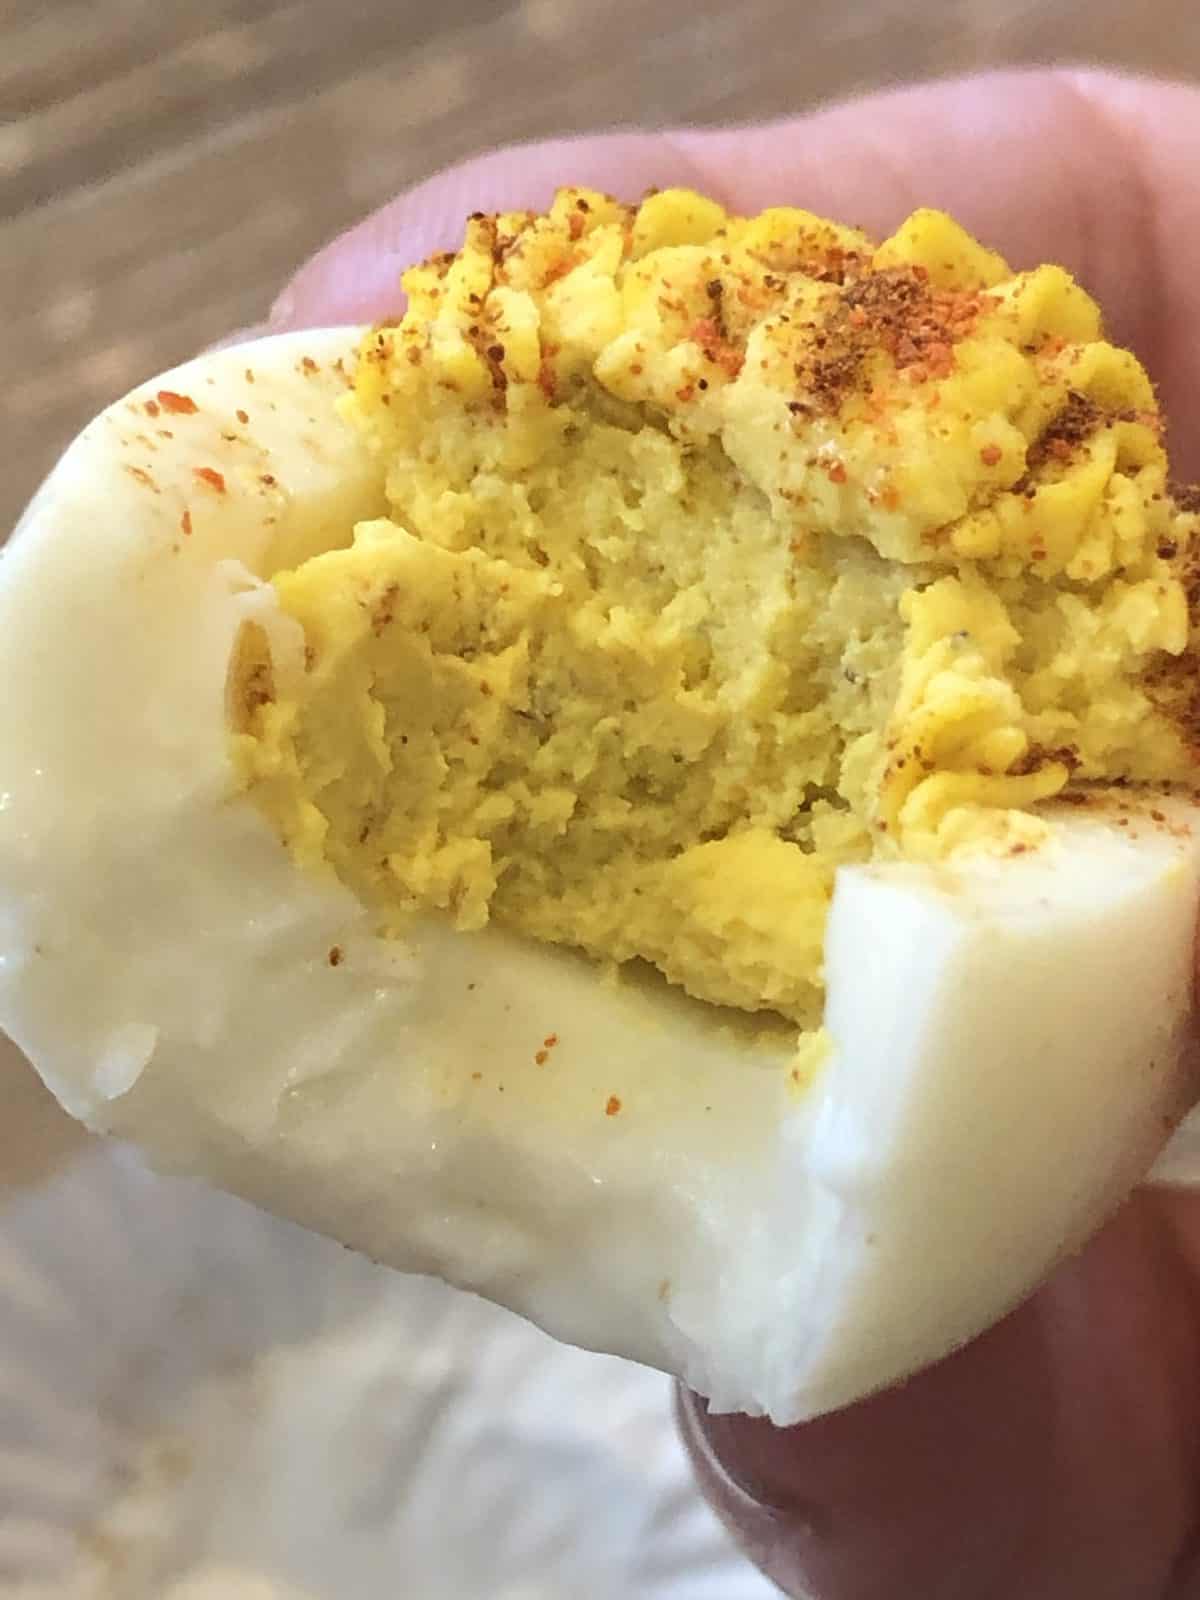 A hand holding a  bite of a WW deviled egg